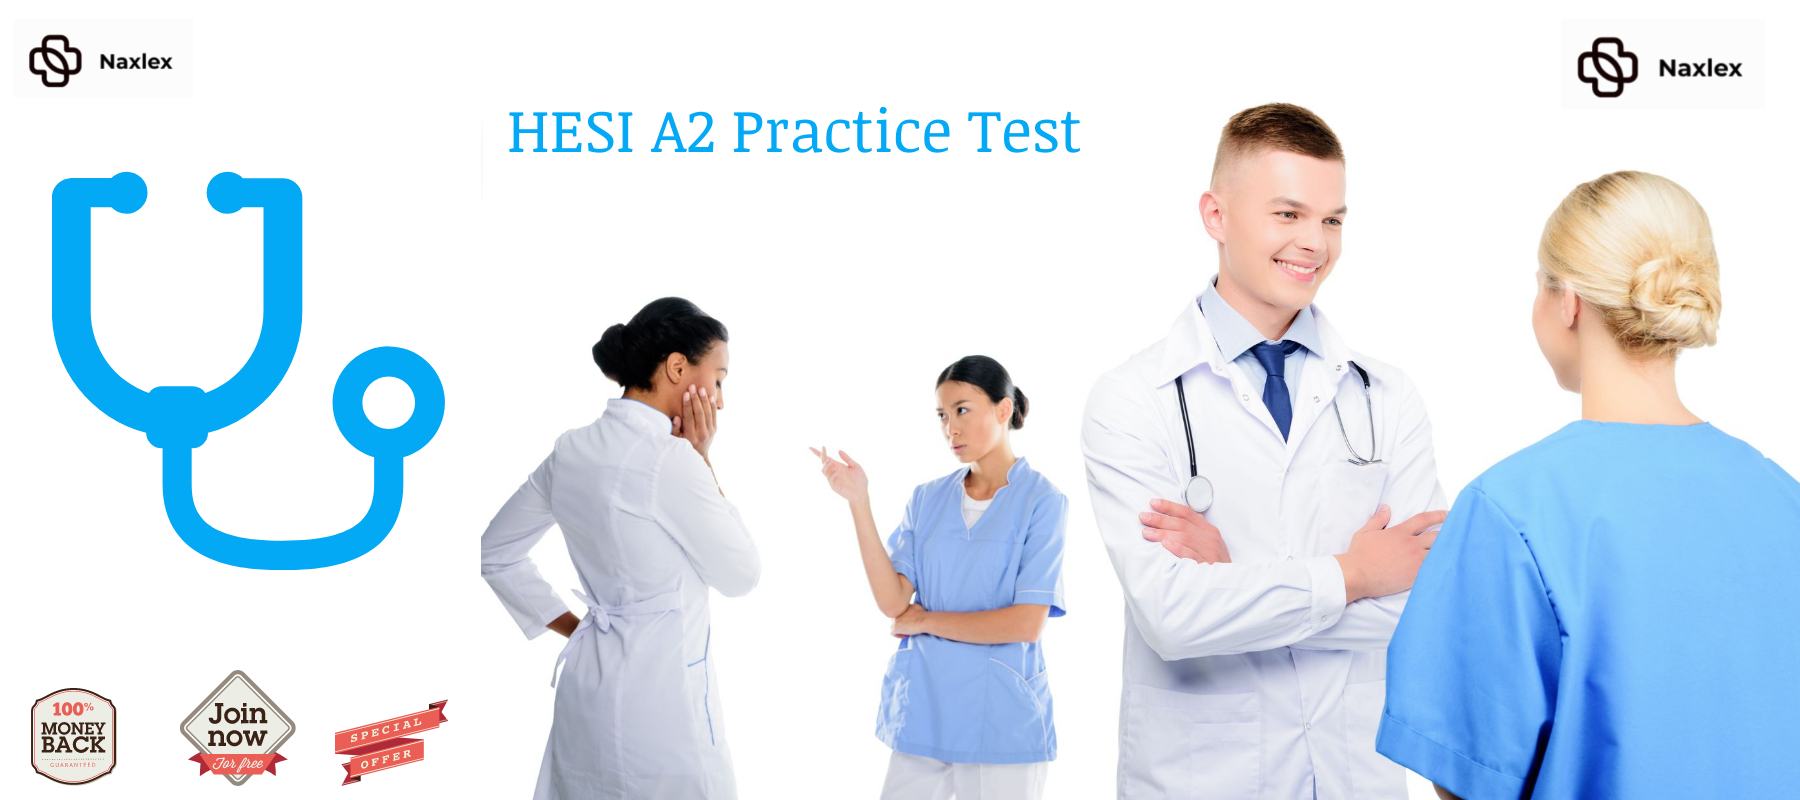 Practice Test for the Hesi A2